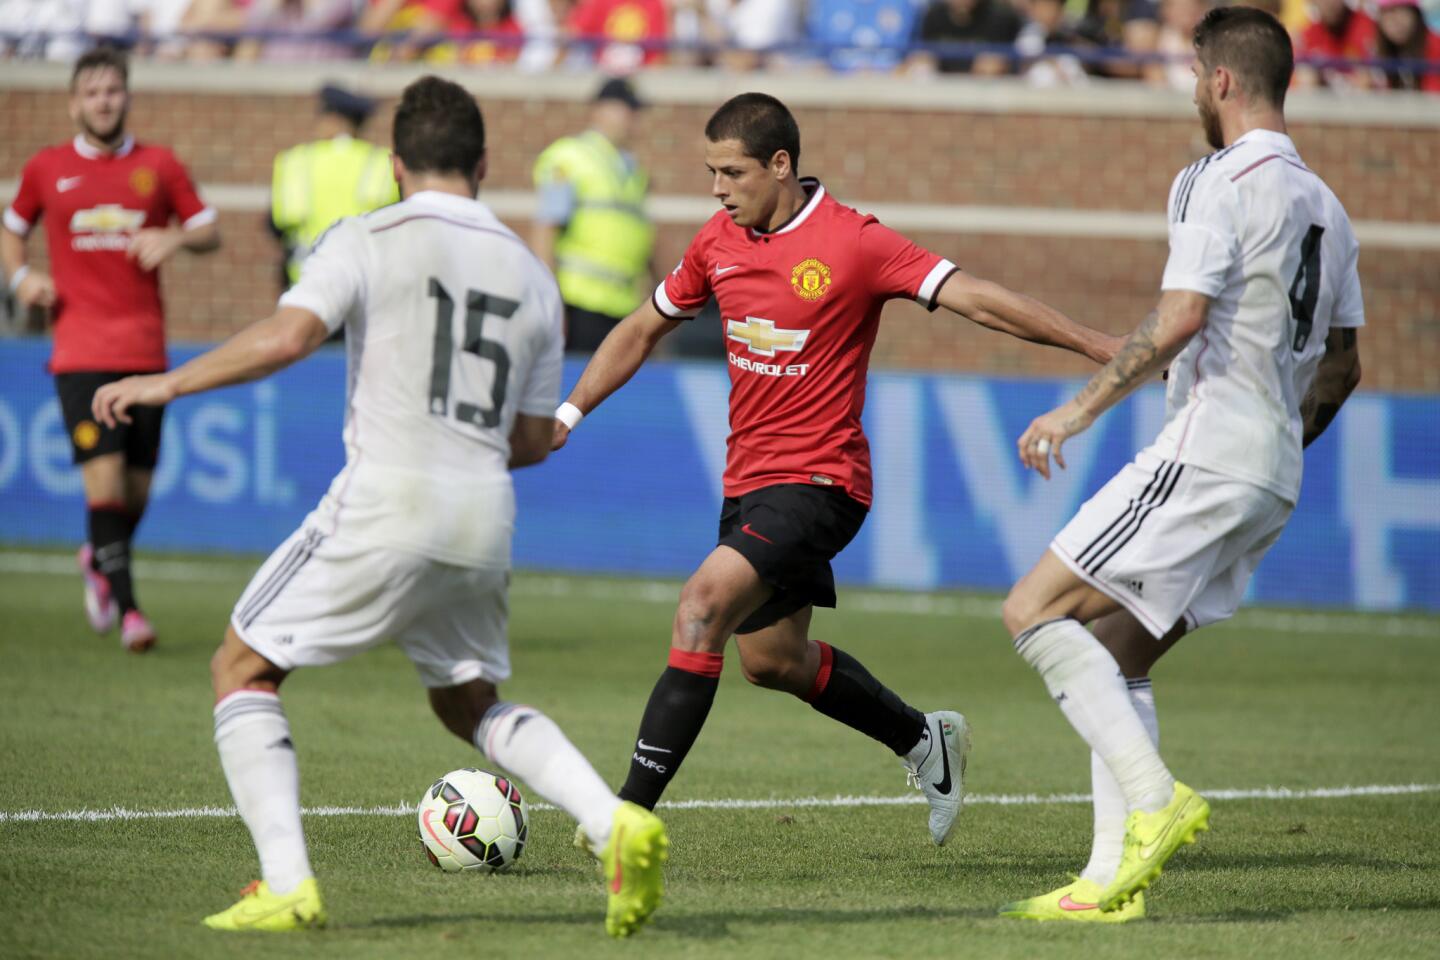 International Champions Cup 2014 - Real Madrid v Manchester United